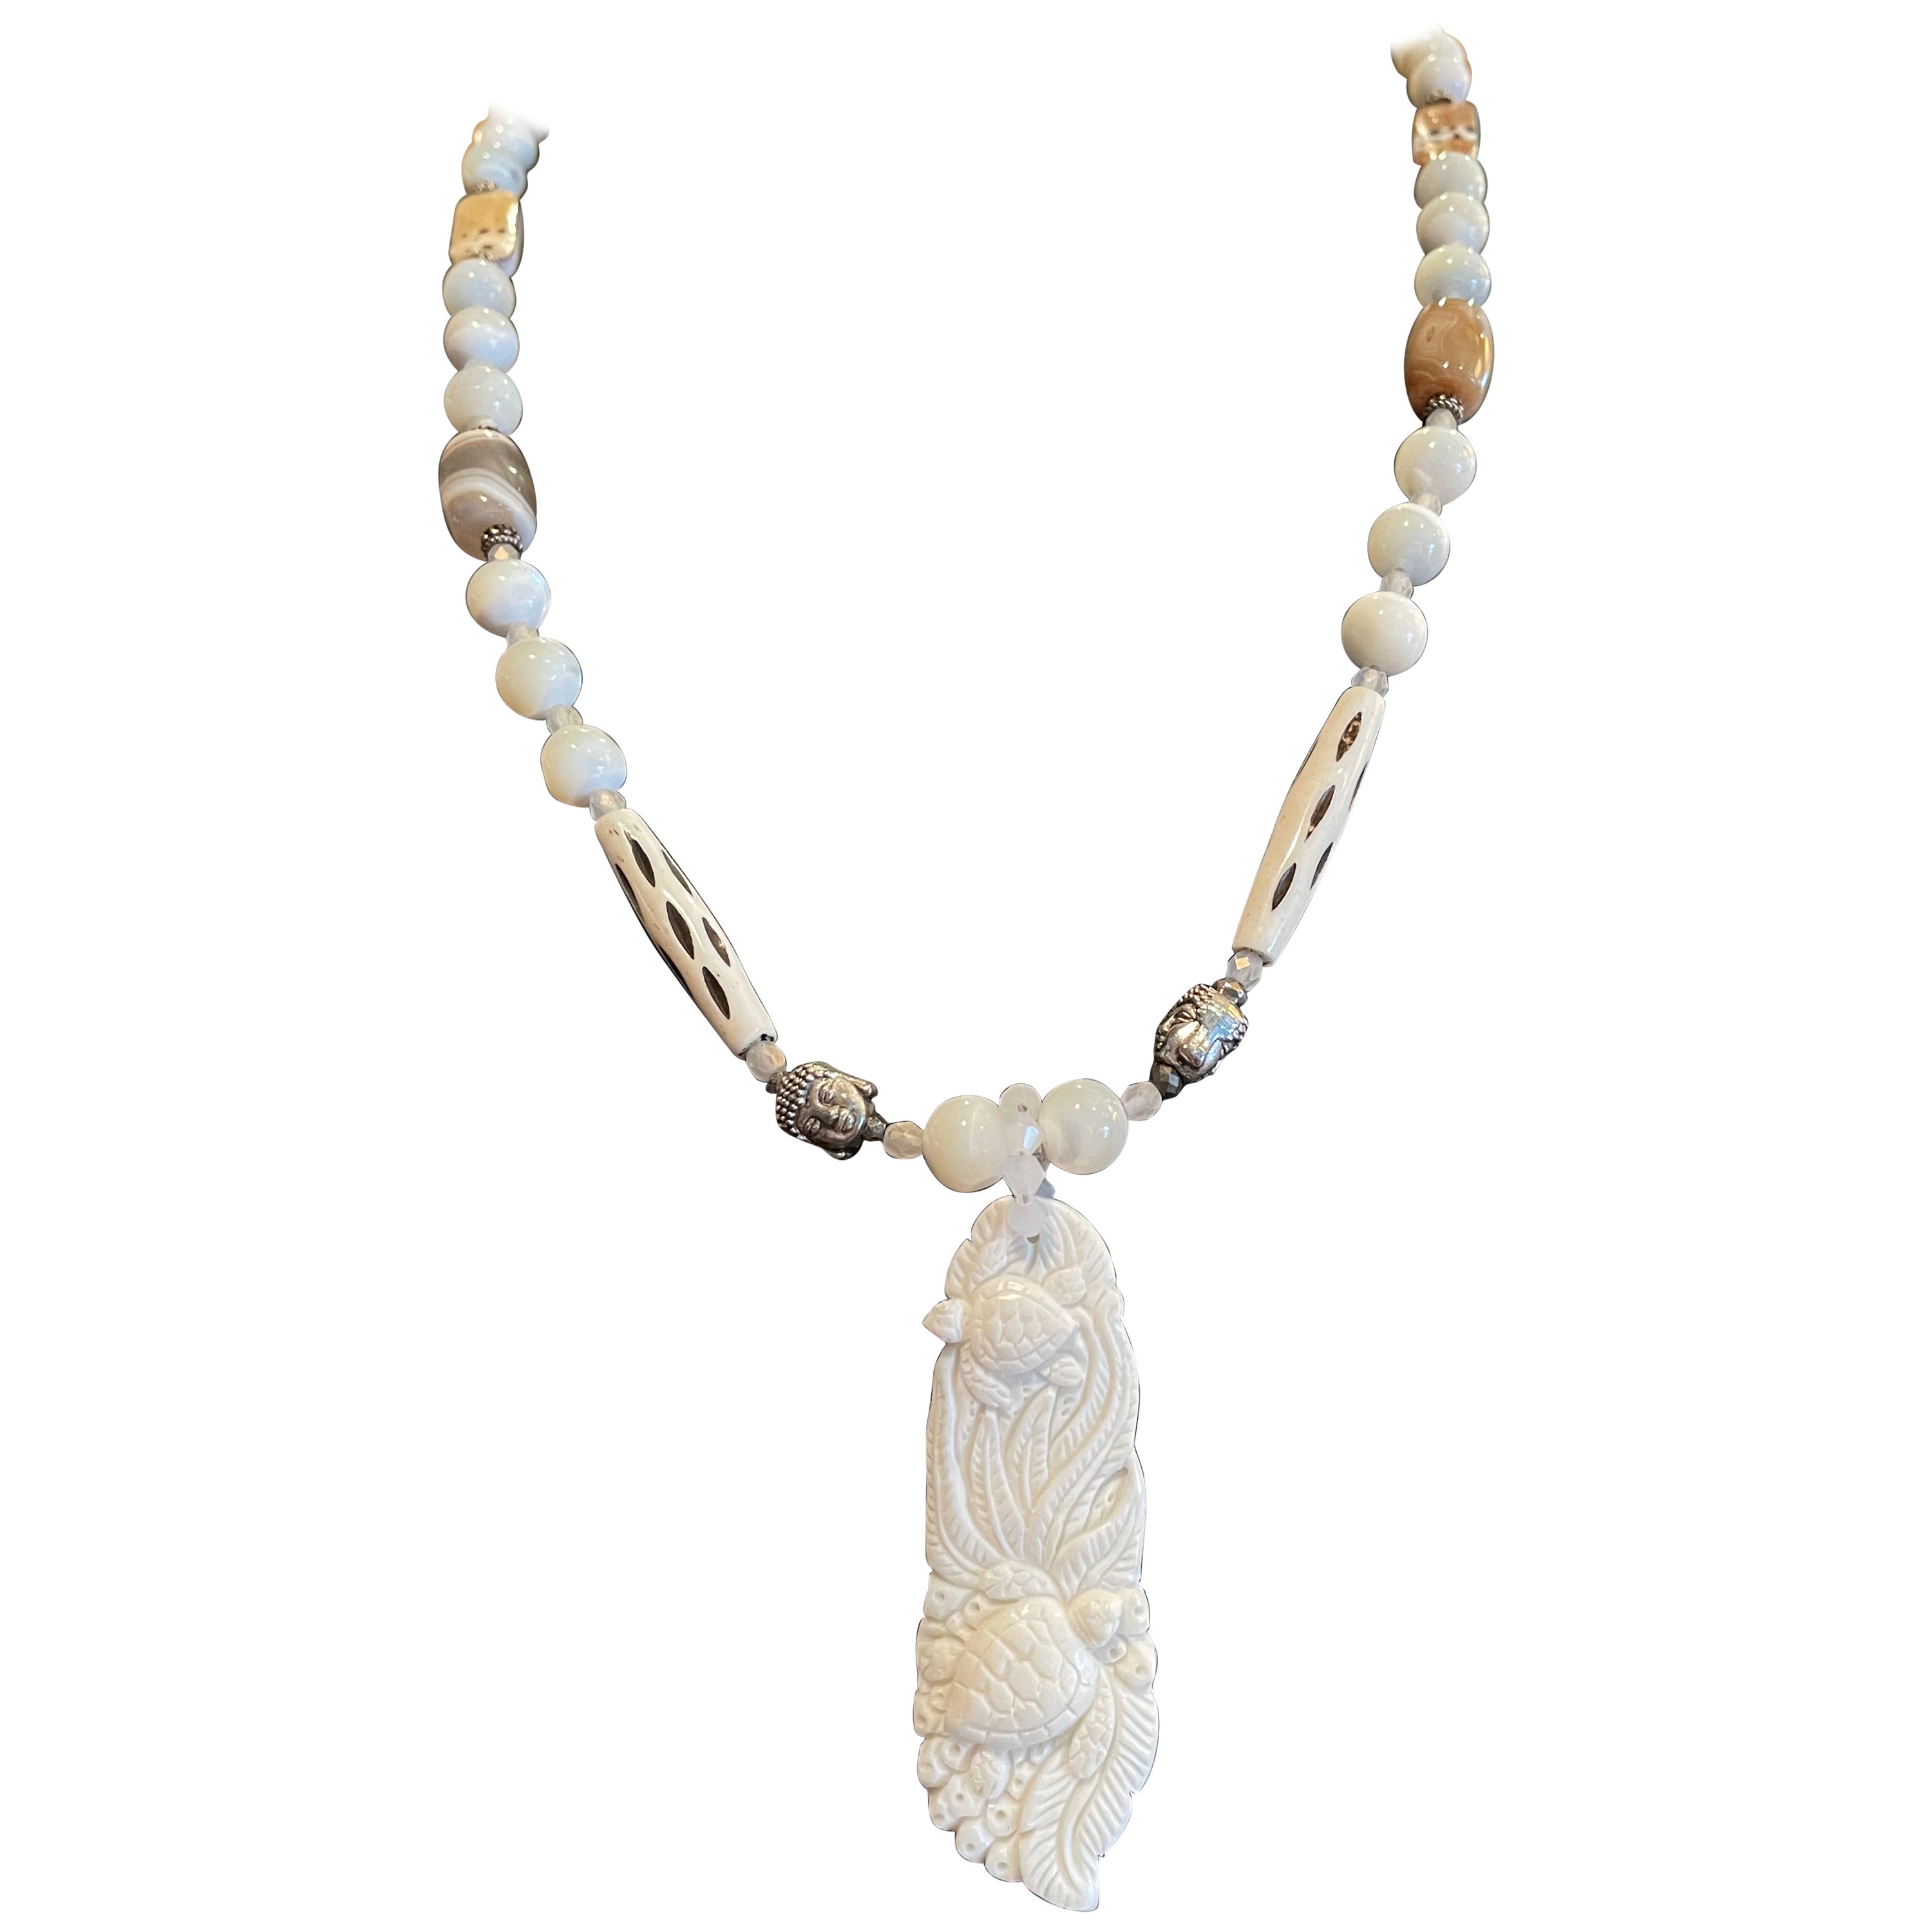 LB handmade one of a kind carved bone pendant stunning MOP necklace For Sale